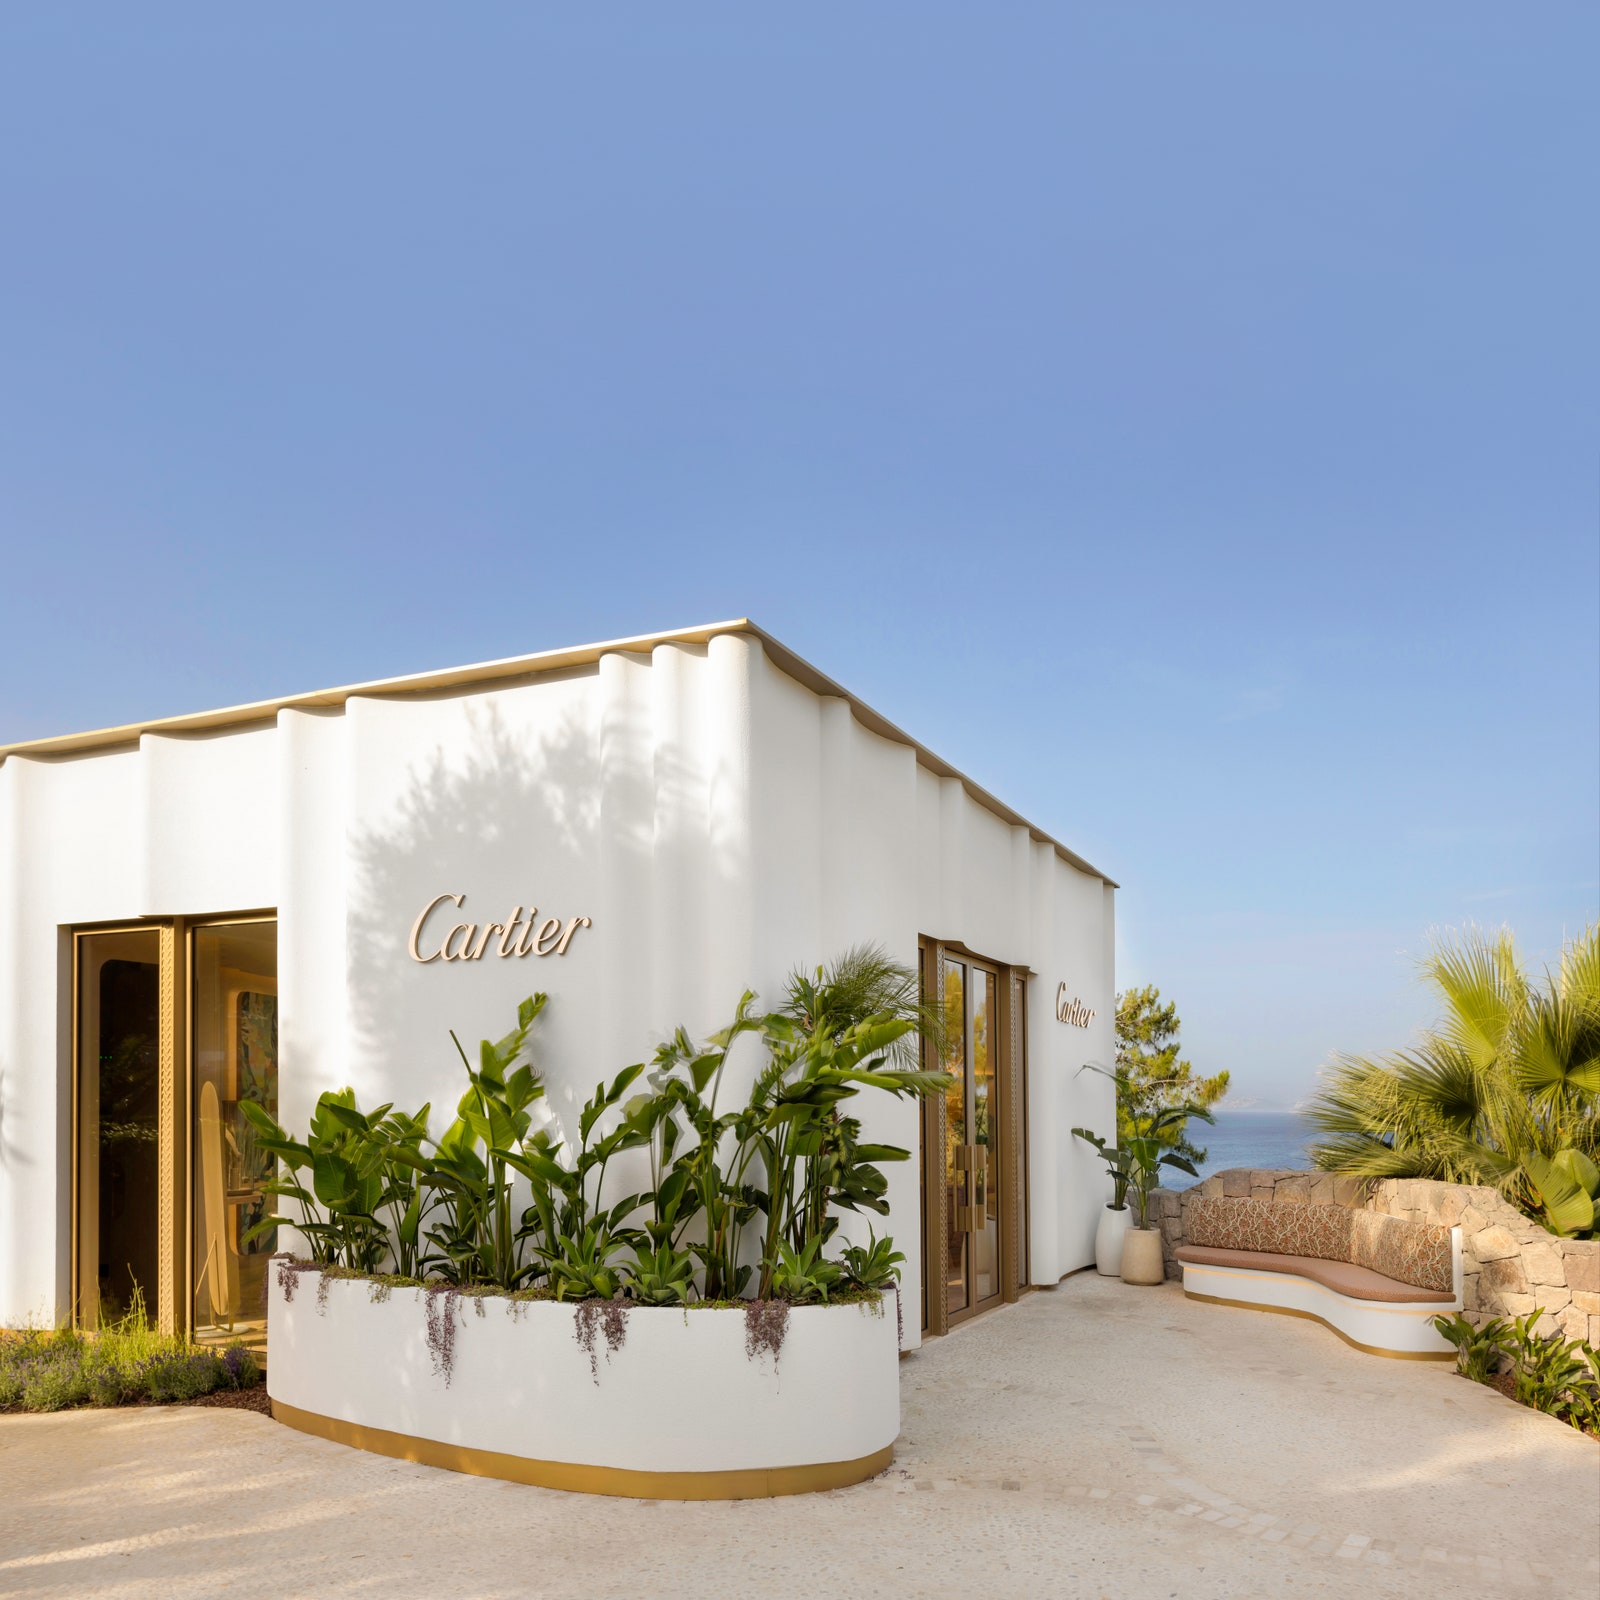 Cartier has opened its first boutique in Bodrum